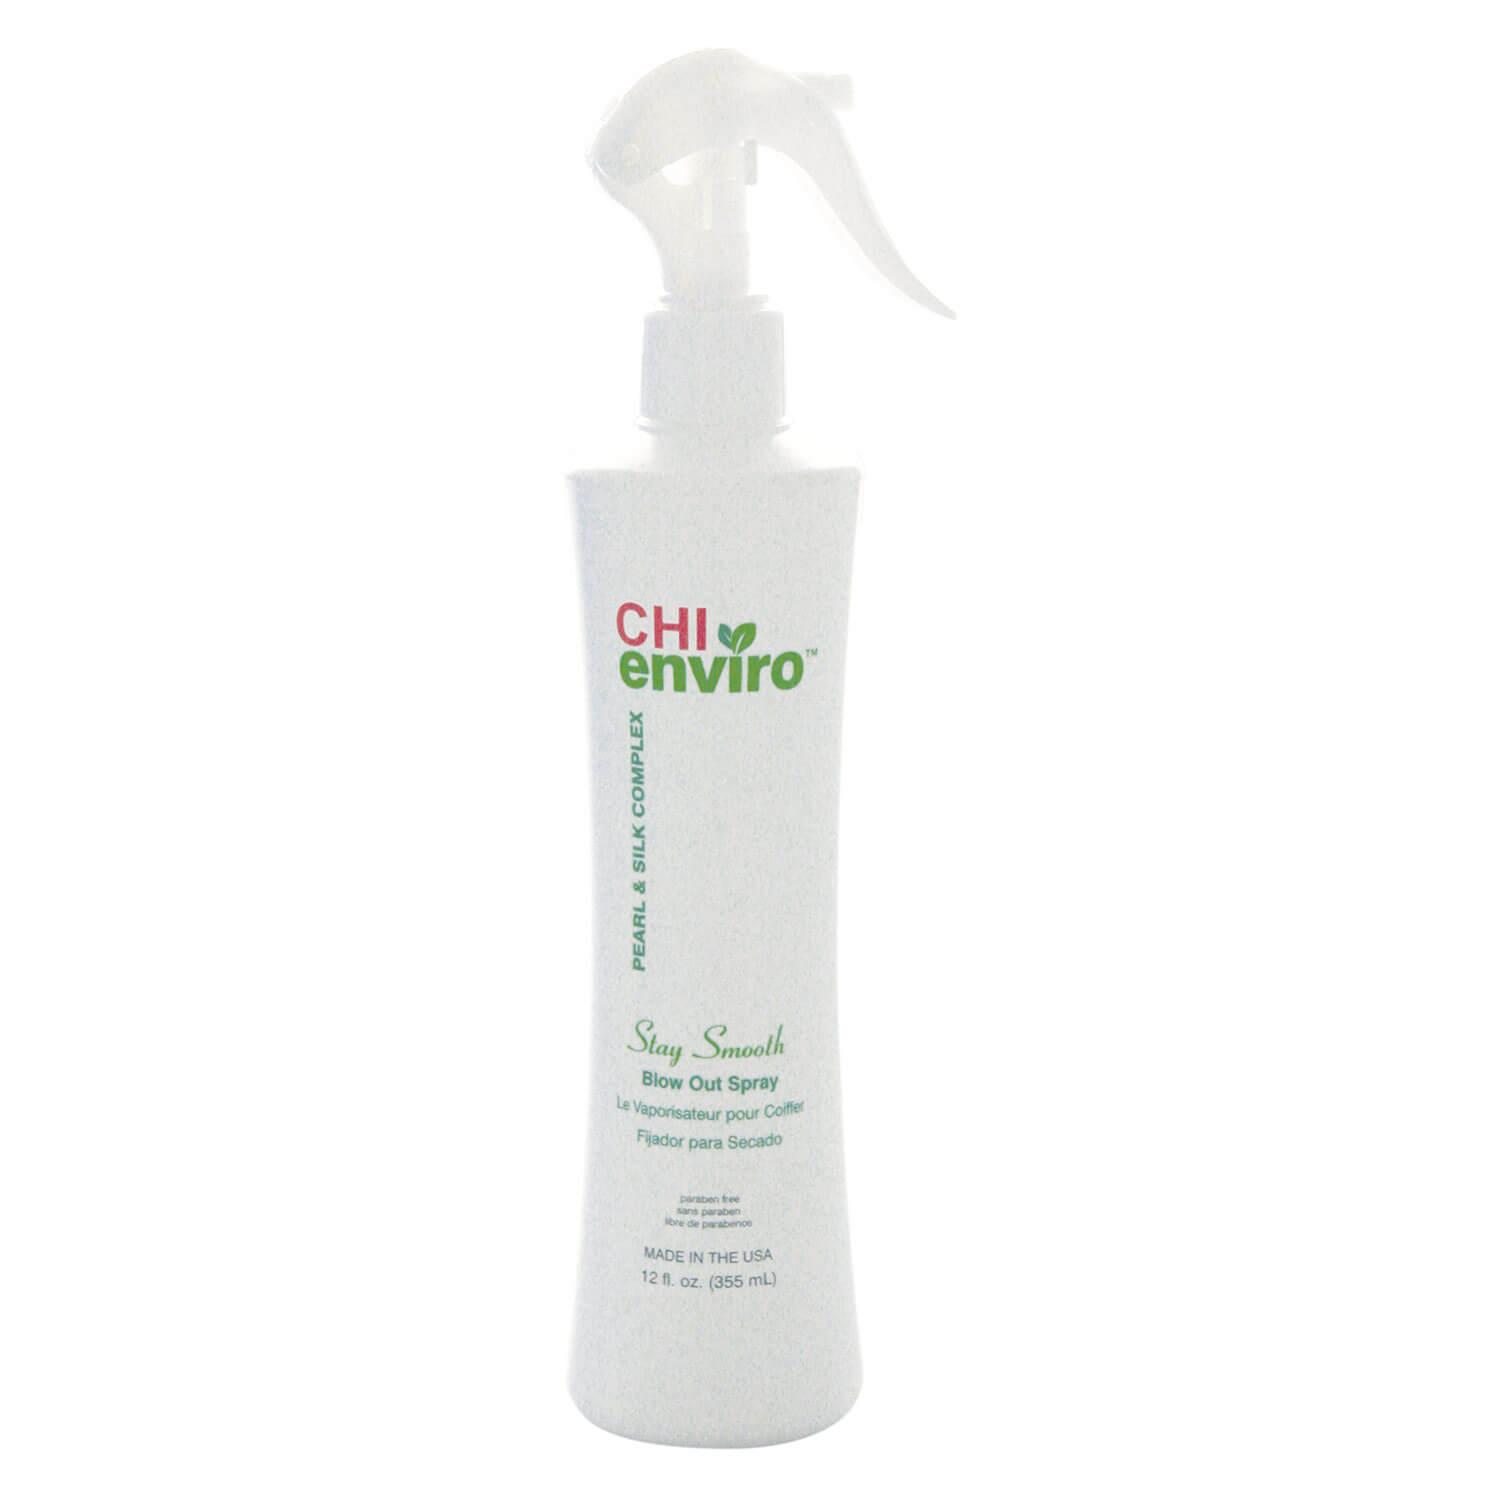 CHI enviro - Stay Smooth Blow Out Spray